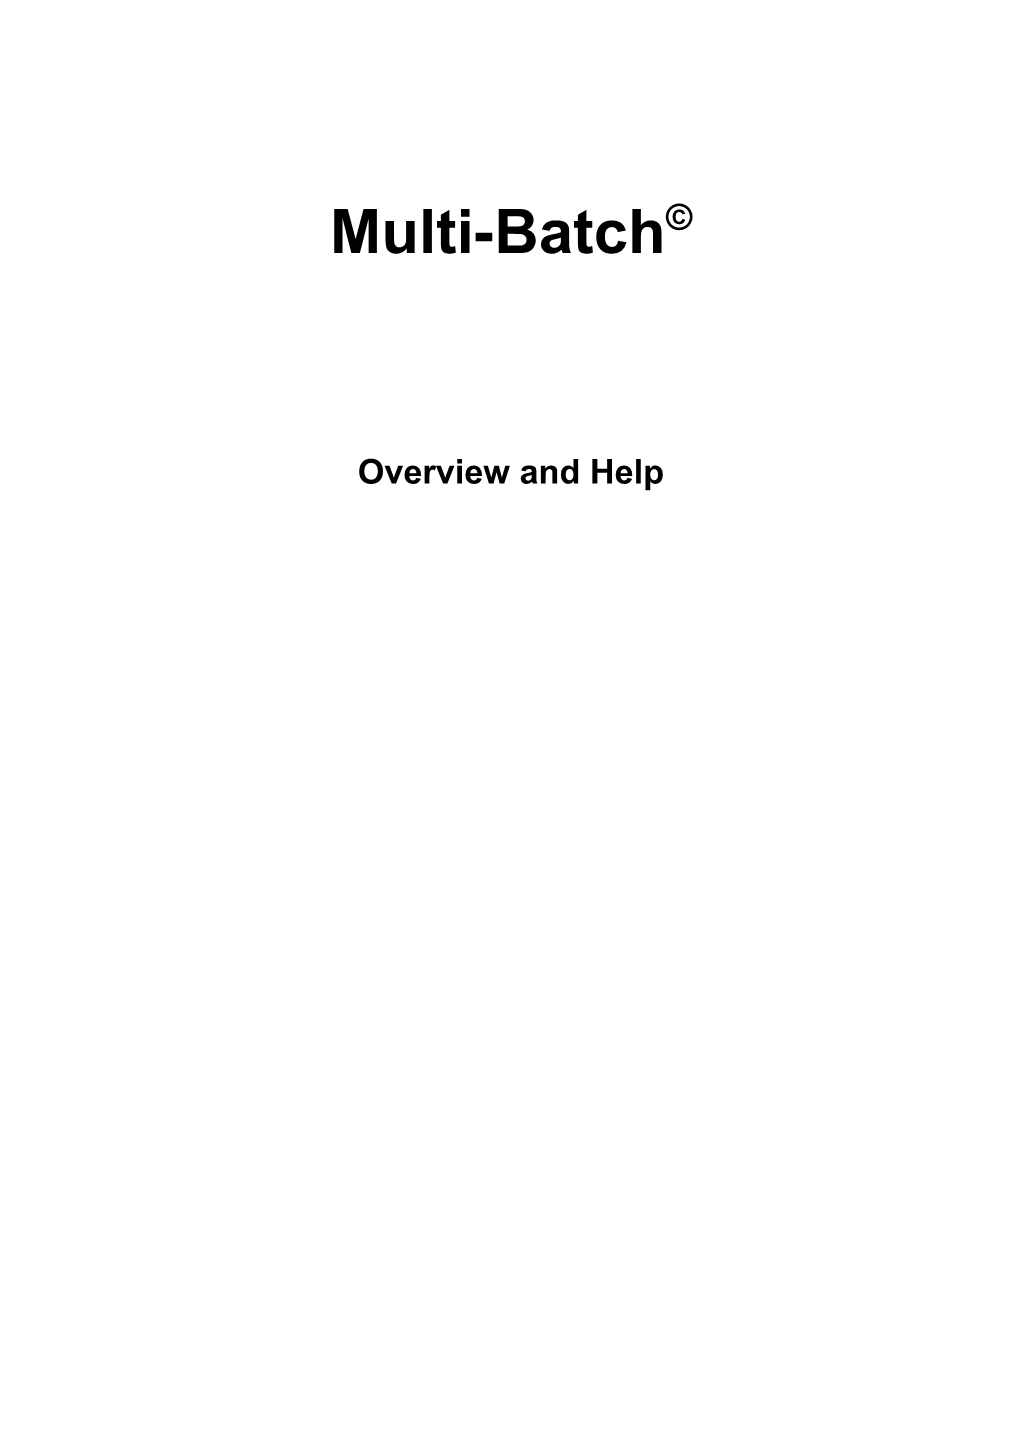 Multi-Batch Help and Overview